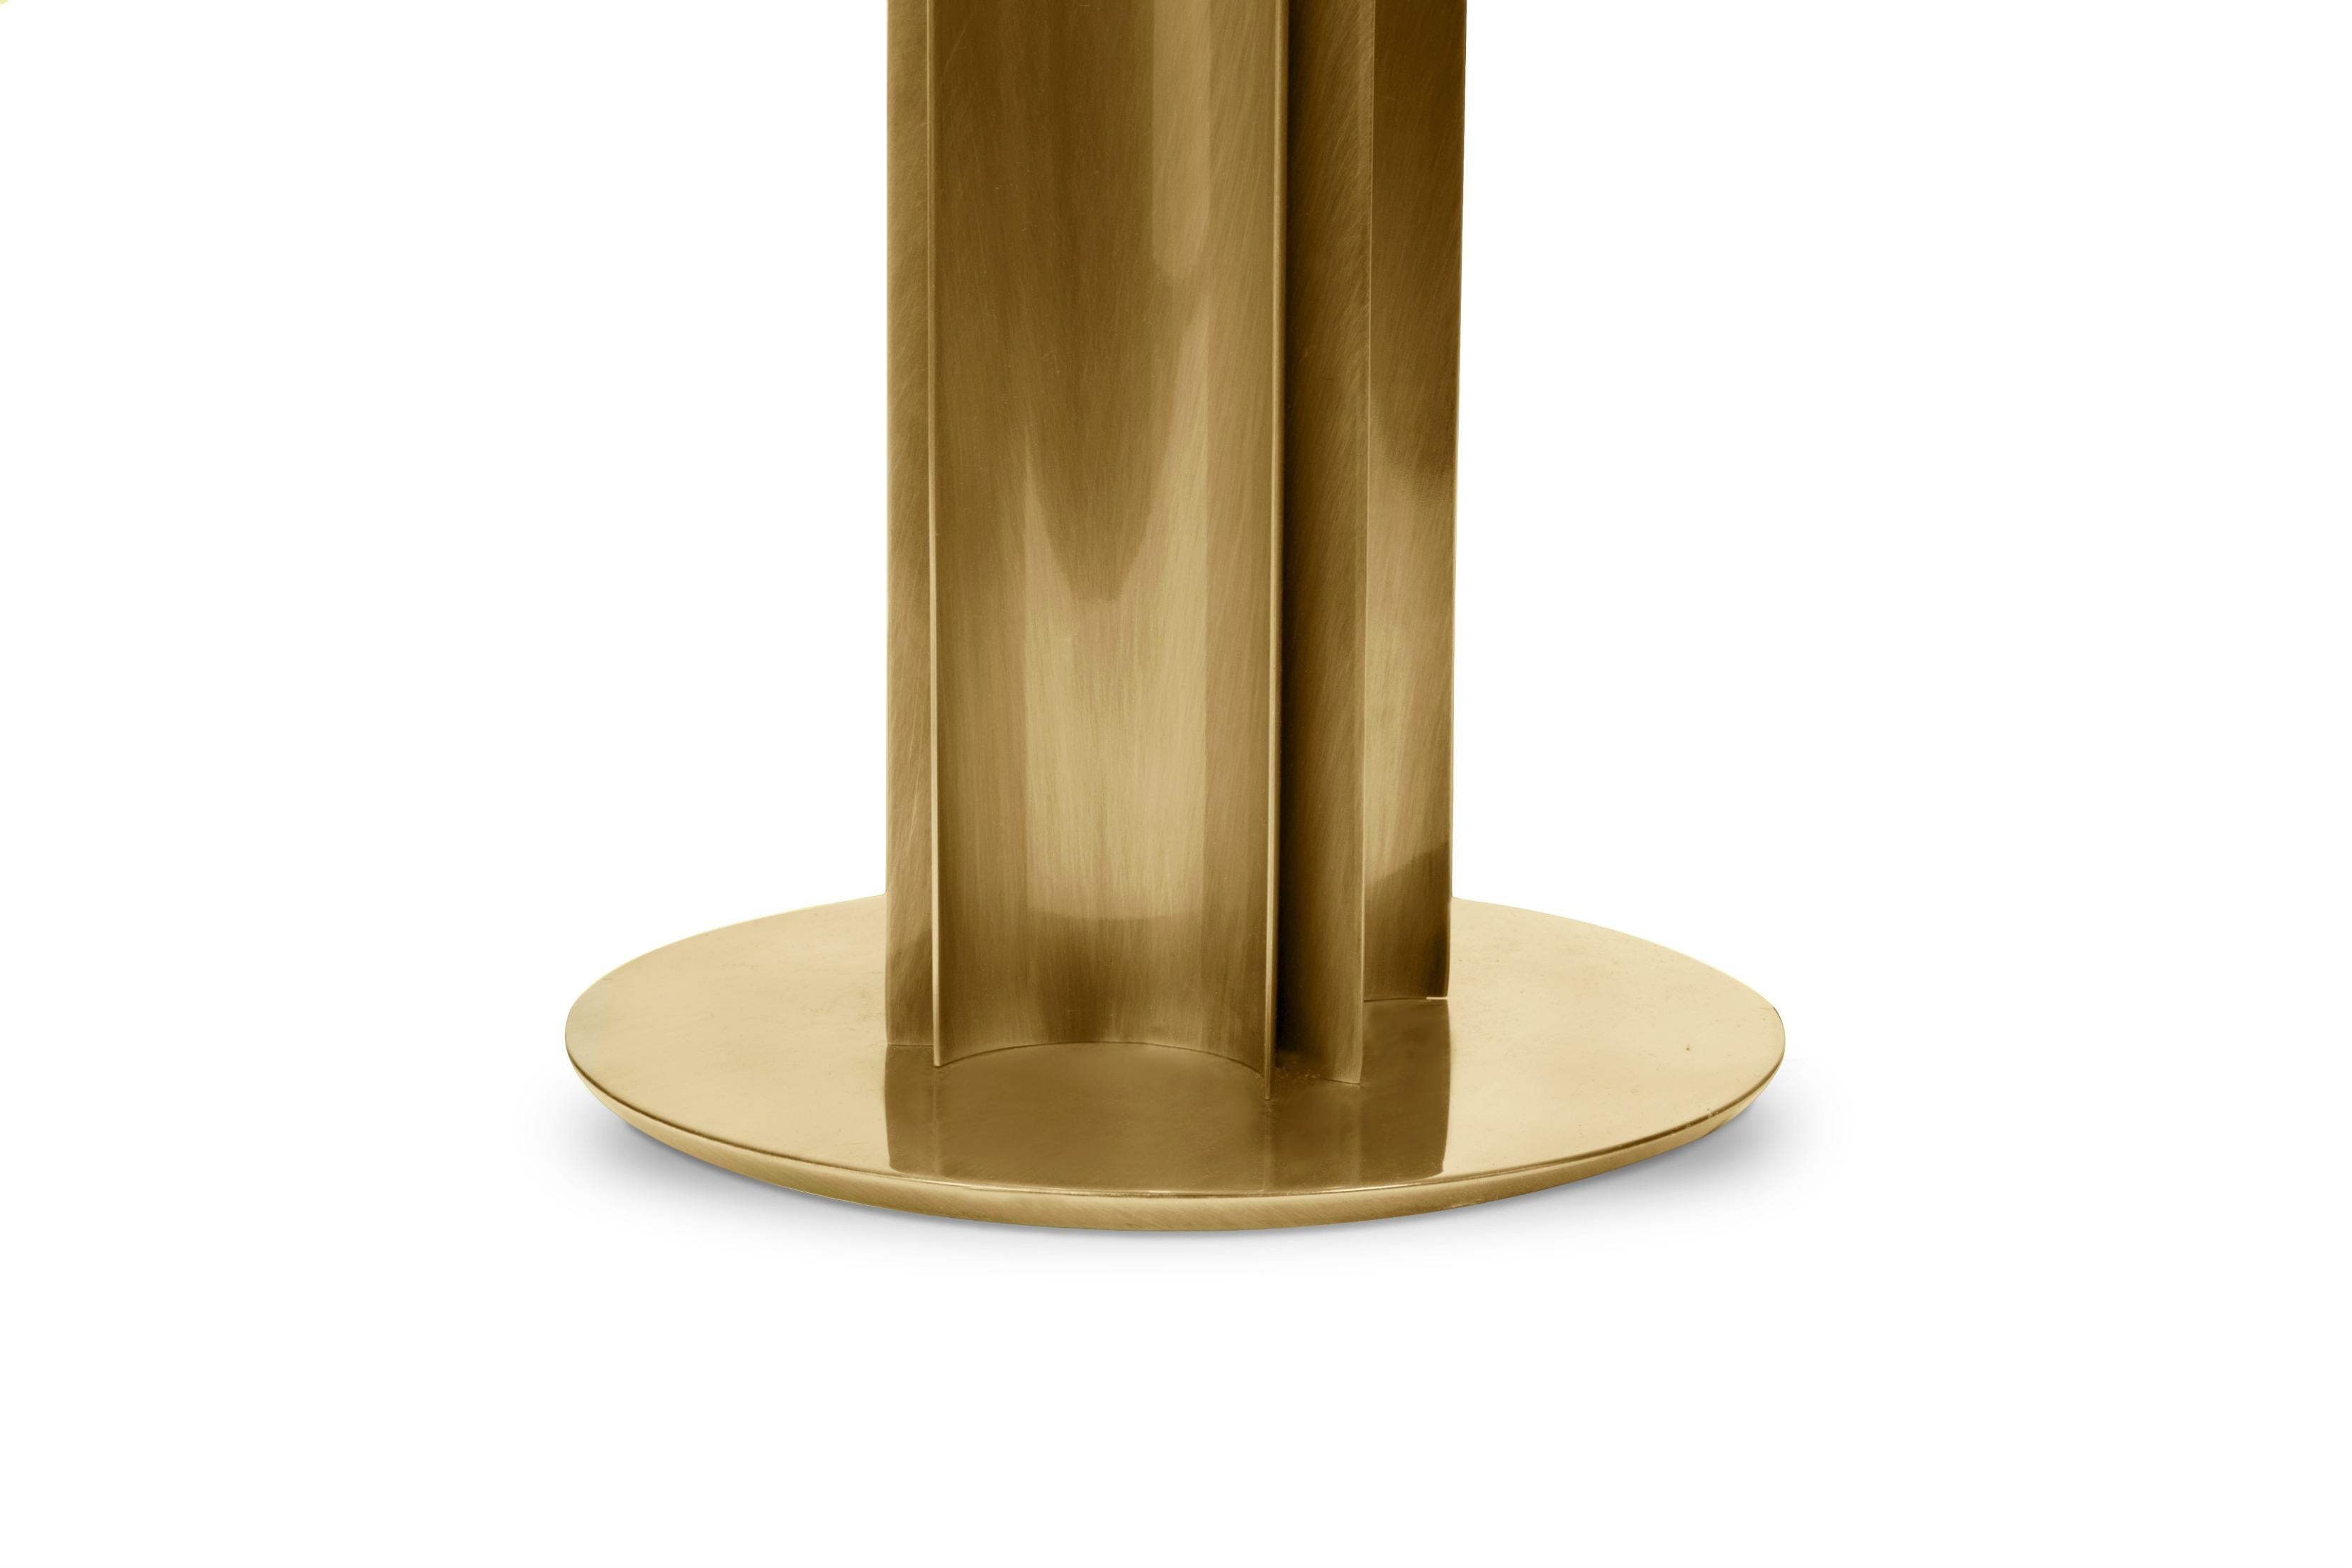 Portuguese Cyrus Floor Lamp in Polished Brass by Brabbu For Sale